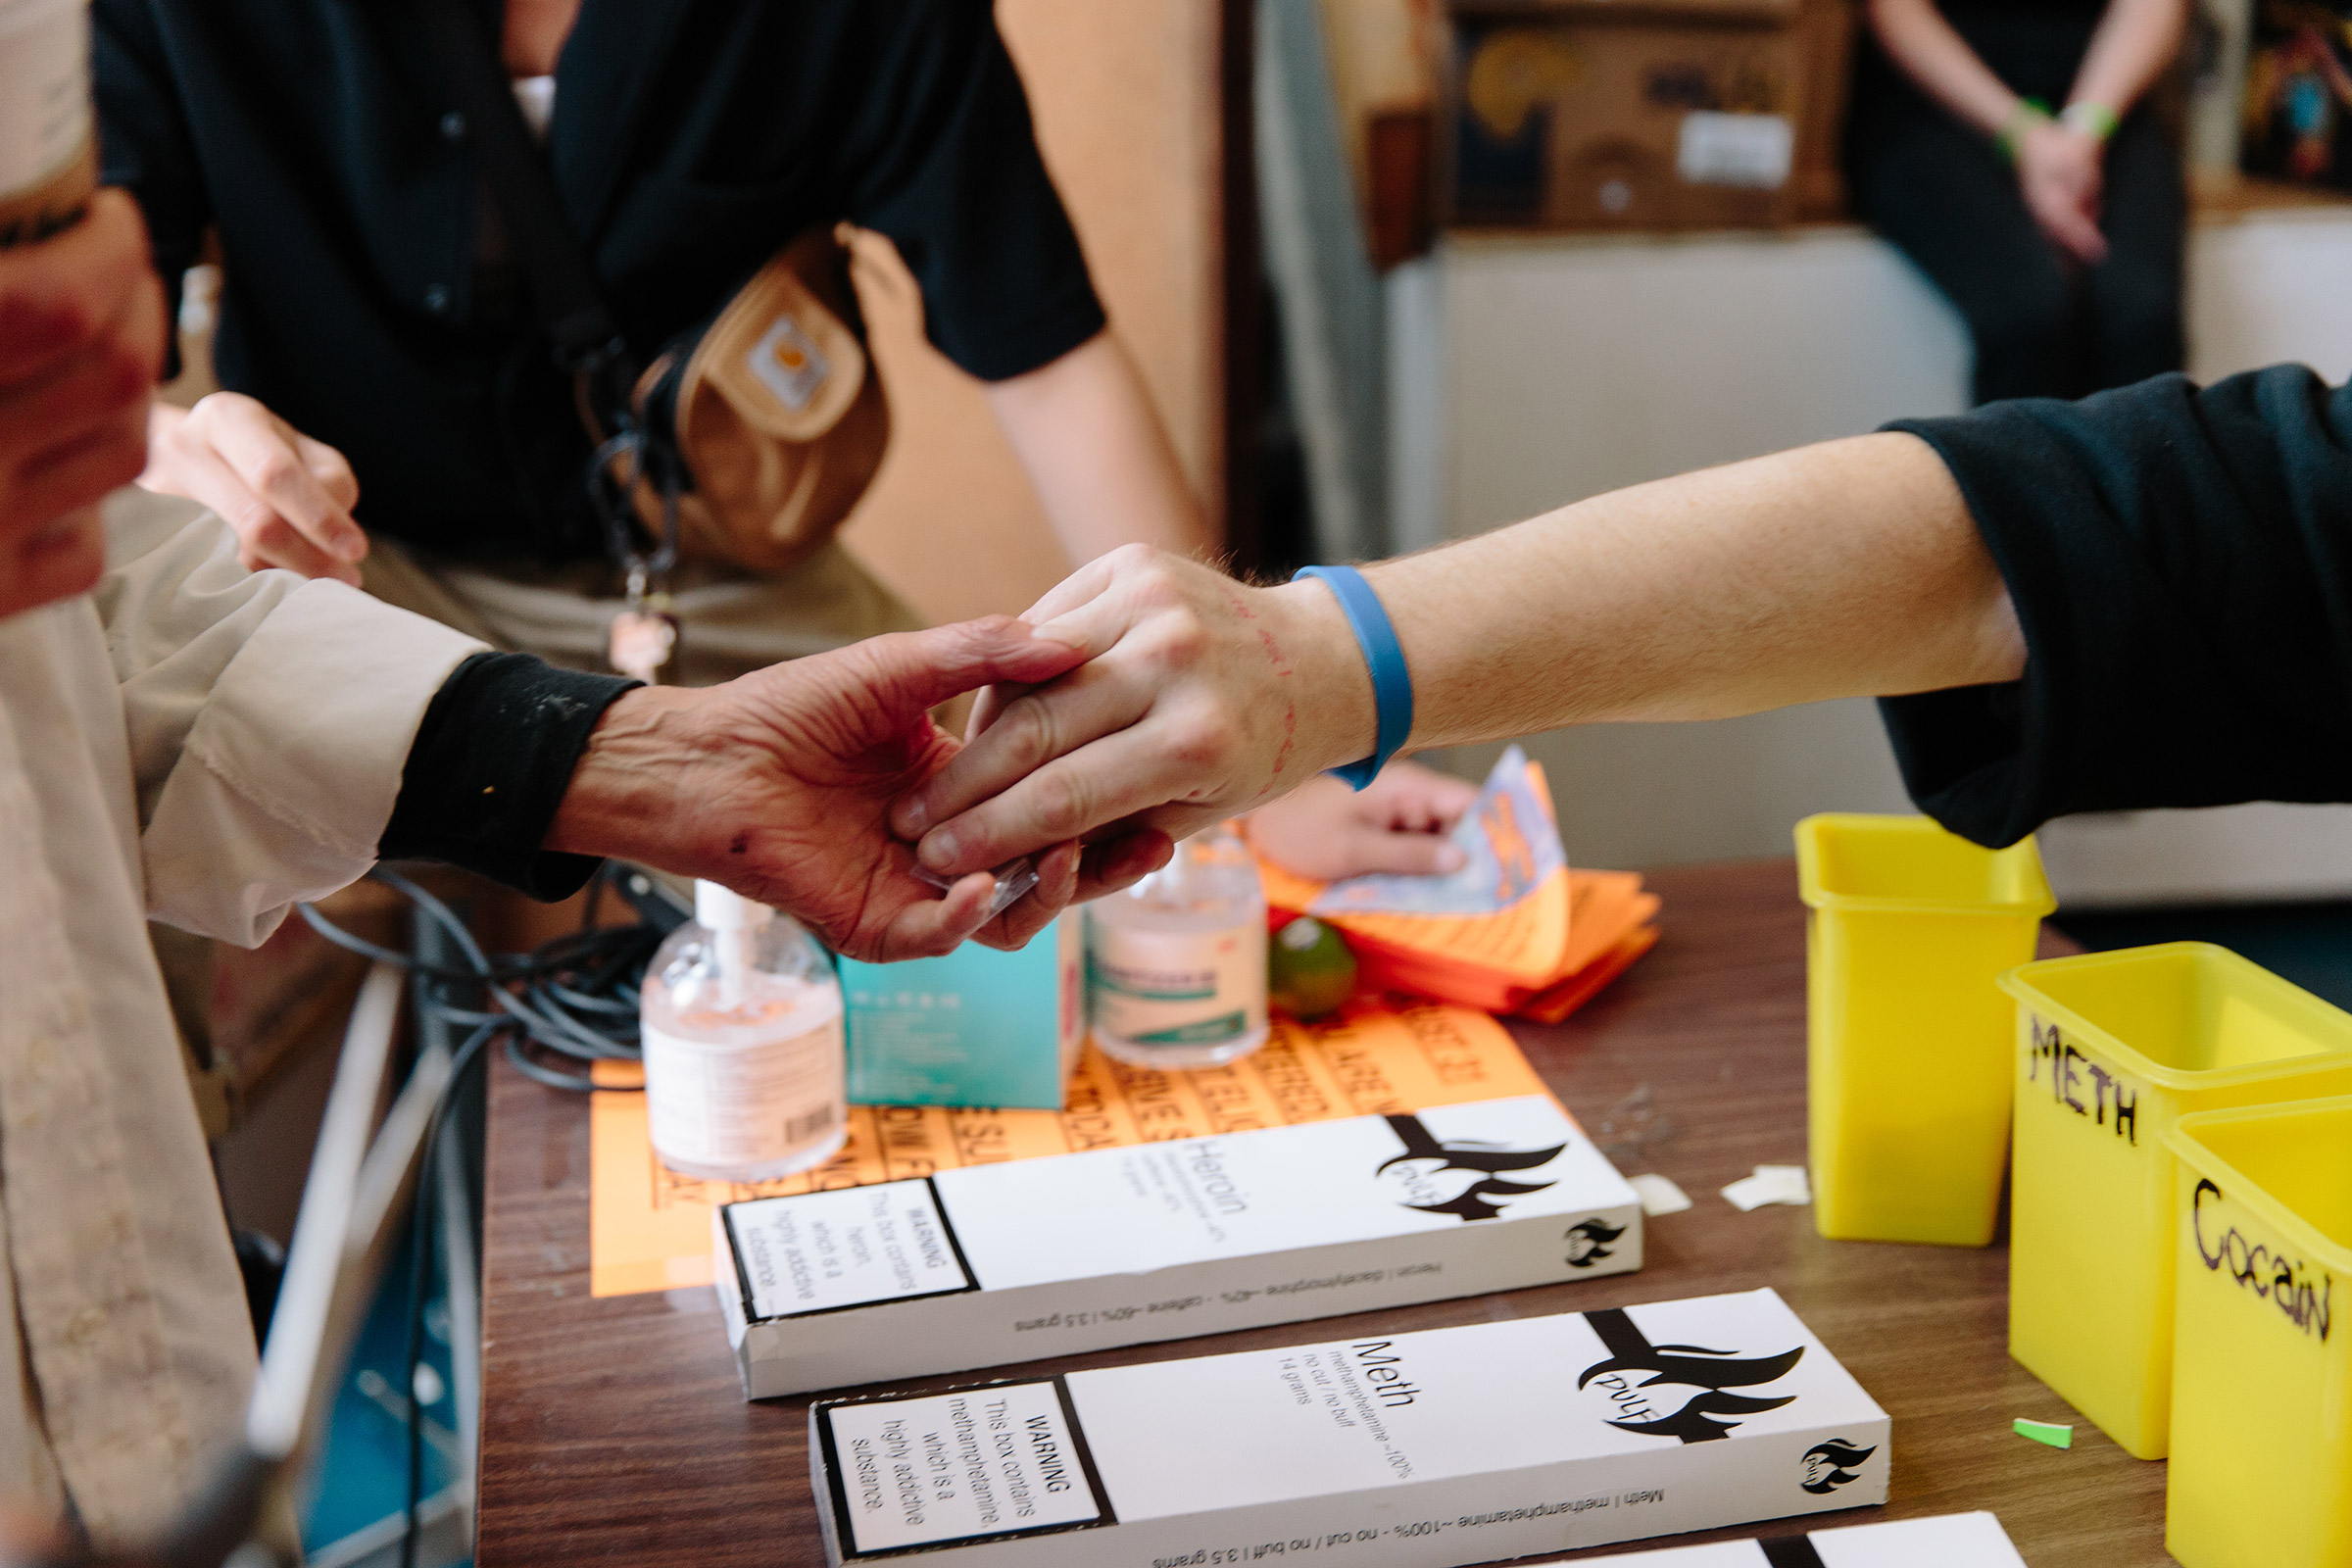 Free and tested heroin, meth, and cocain are distributed at VANDU on International Overdose Awareness Day in Vancouver, B.C. on August 31, 2021. Jackie Dives